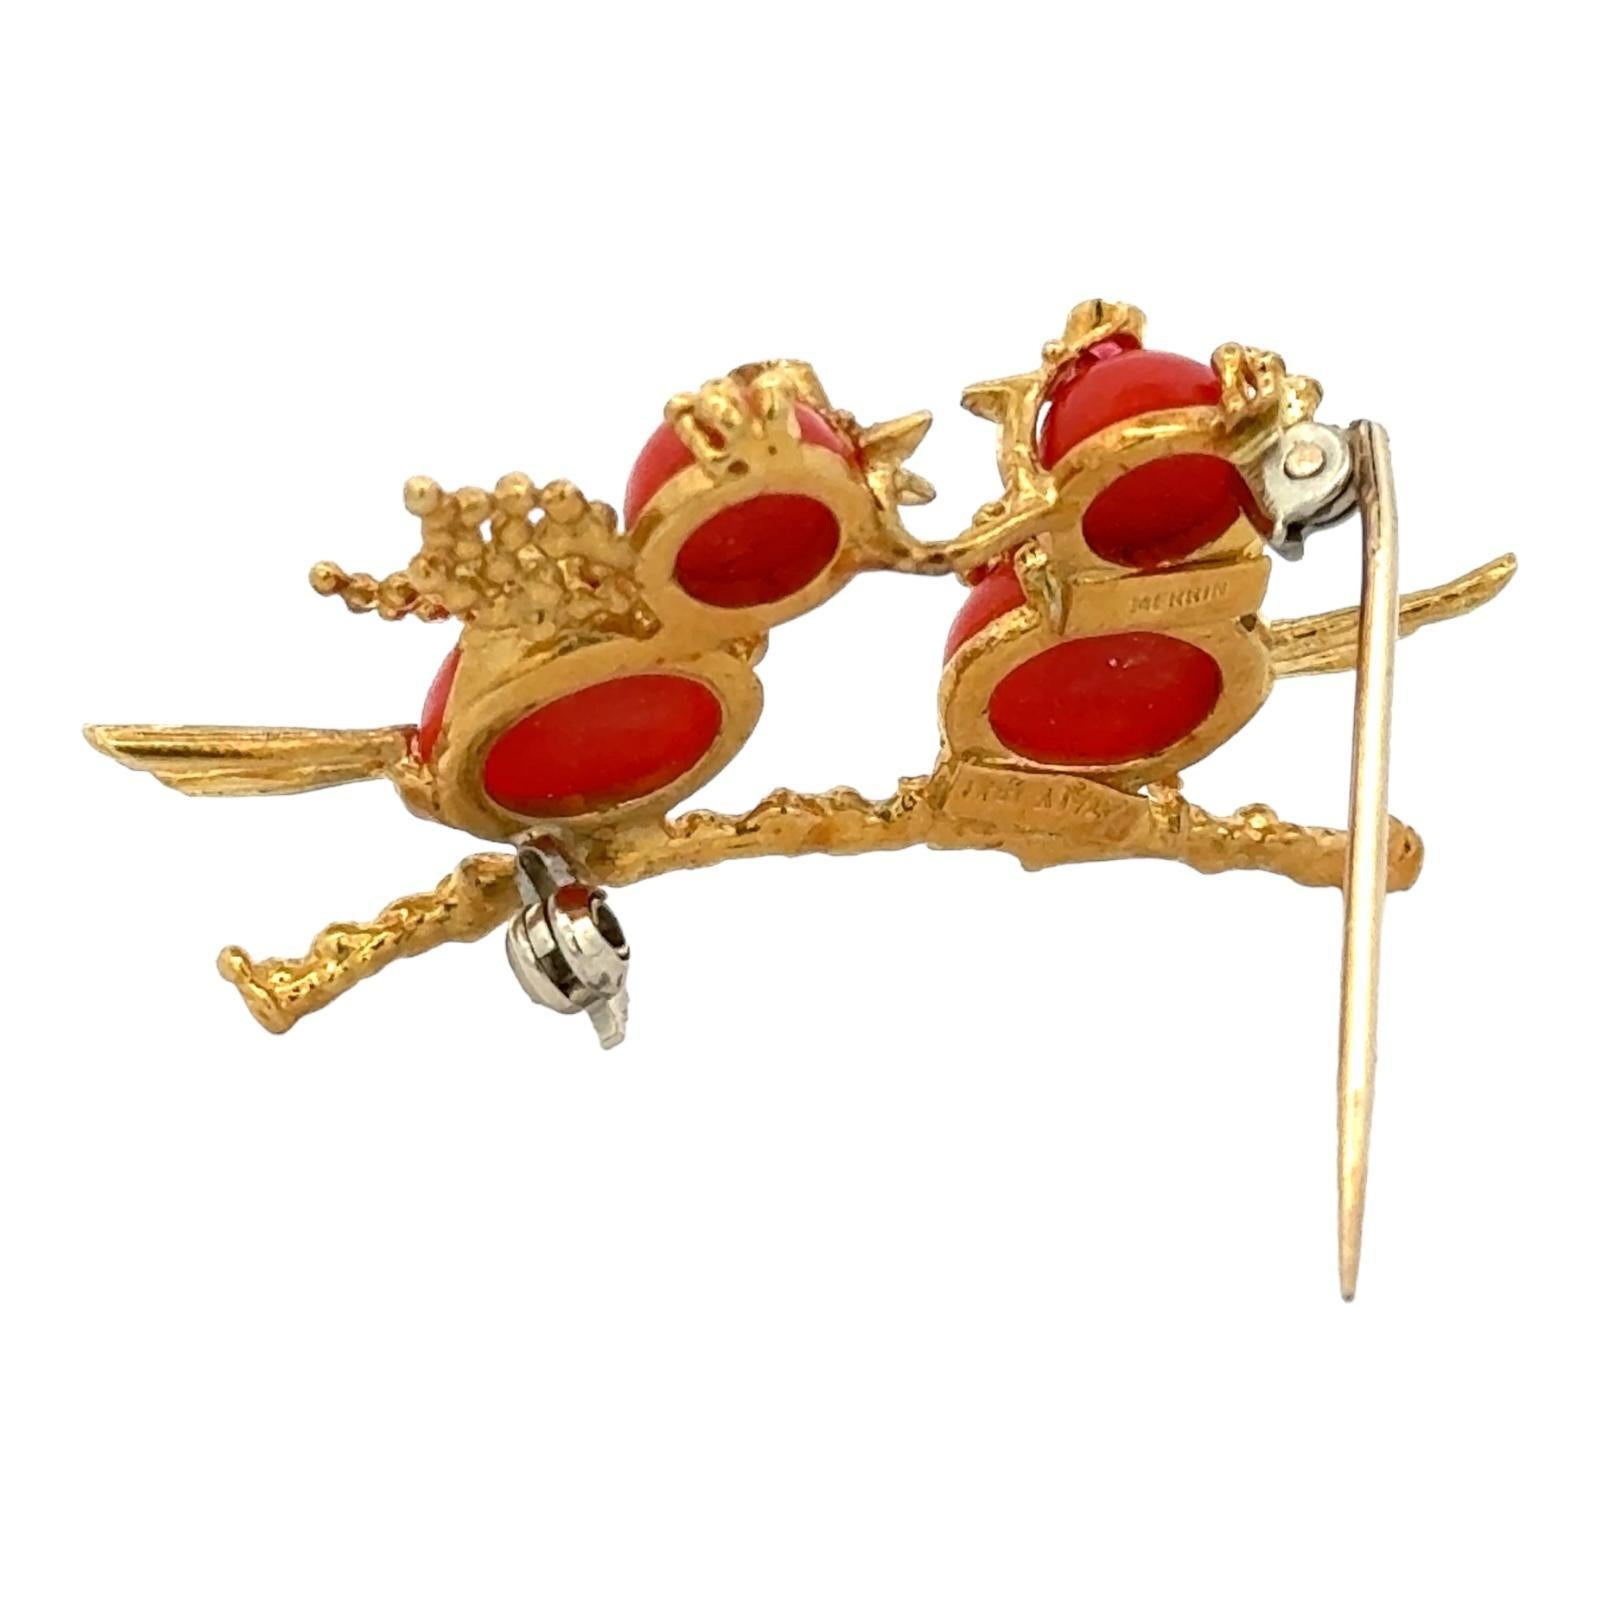 Adorable Italian coral lovebirds pin handcrafted in 18 karat yellow gold. The intricately designed birds feature cabochon coral gemstones and textured gold. The pin measures 1.00 x 1.75 inches. Stamped Italy 18Kt Merrin. Weight: 9.9 grams.